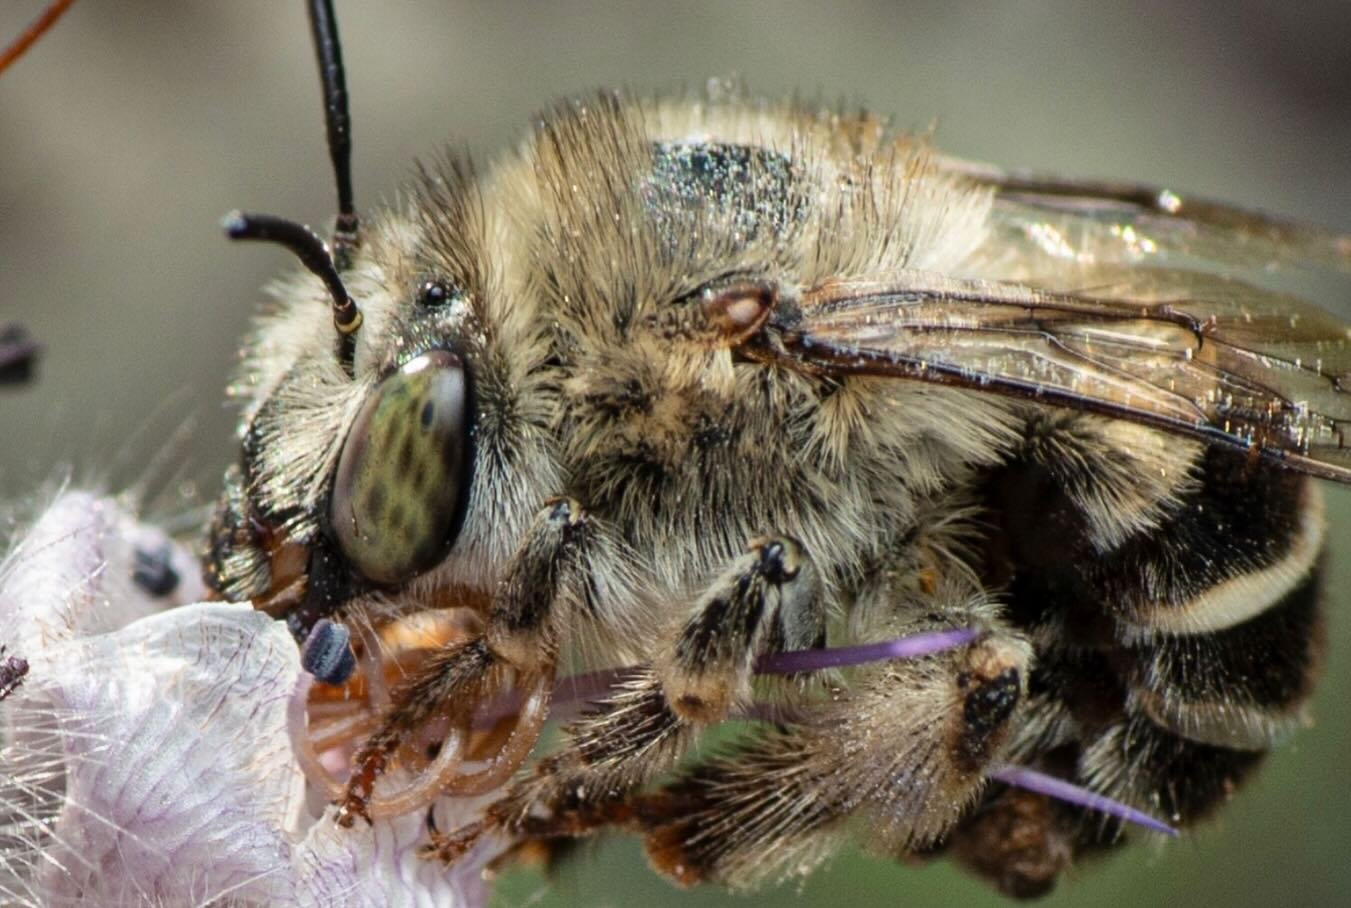 Psycho Fluffy Bee
.
Aka: Anthophora californica, a bee so frenetic and hard to shoot that  I damn near threw my Nikon set up into the woods and broke down sobbing. 
.
.
Macro pix of bees make them look so chill, like compliant performers offering the